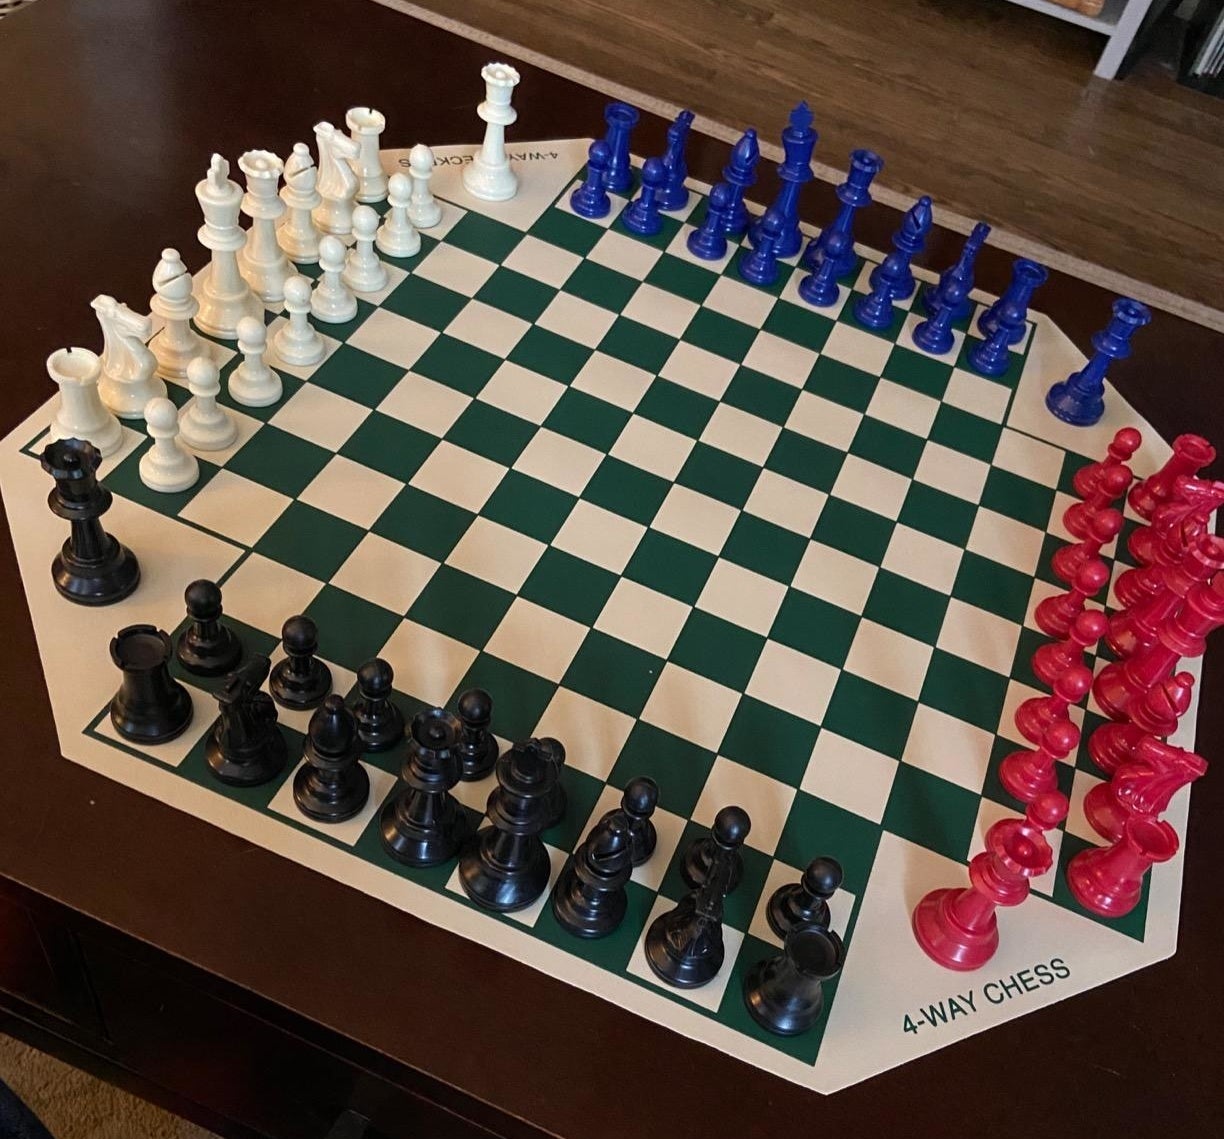 Reviewer image of four-way chessboard set up with red, black, white, and blue chess pieces